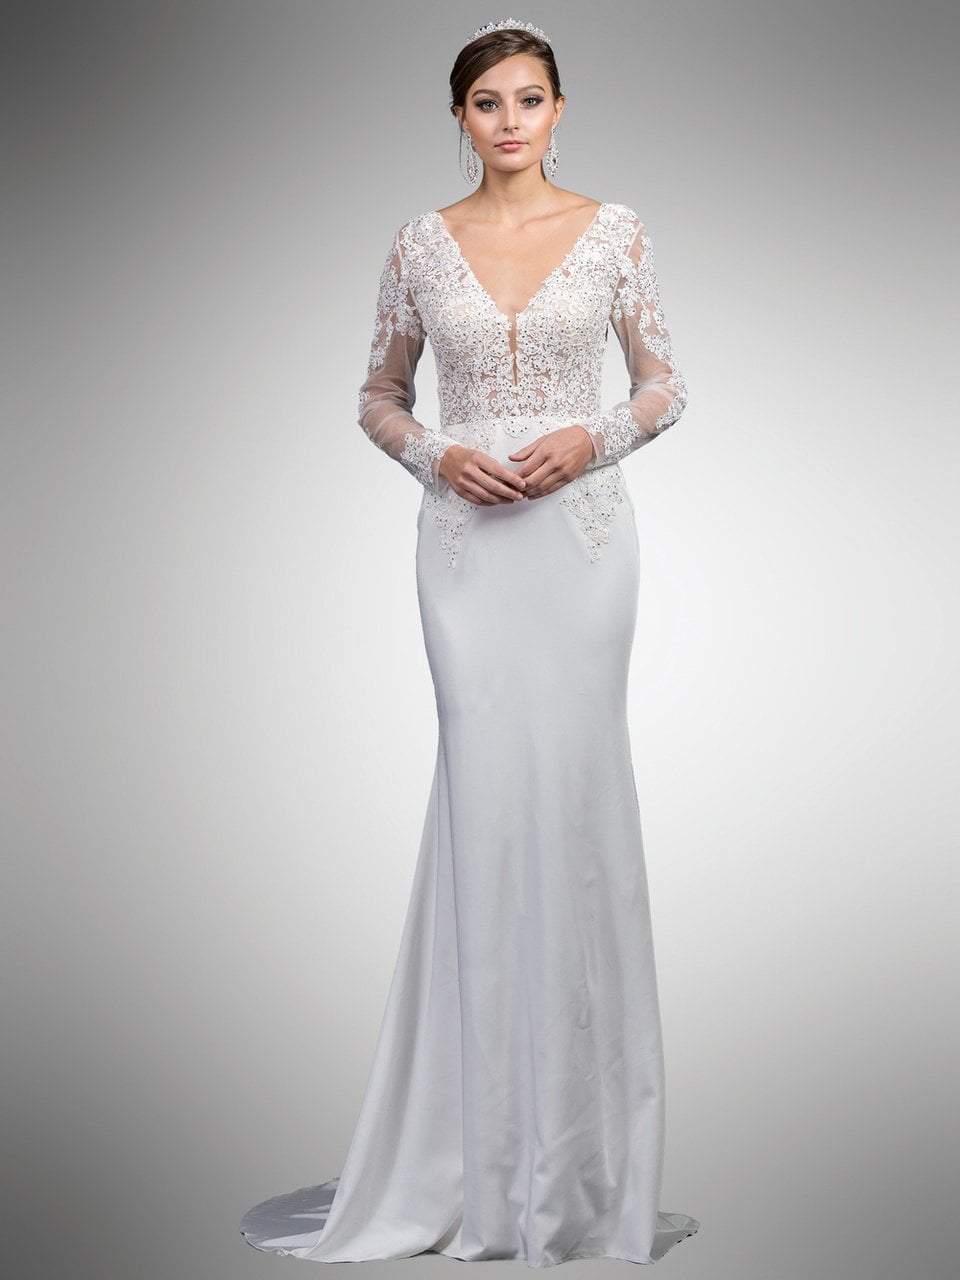 Dancing Queen Bridal - 52 Beaded Lace Long Sleeve V-neck Sheath Dress
